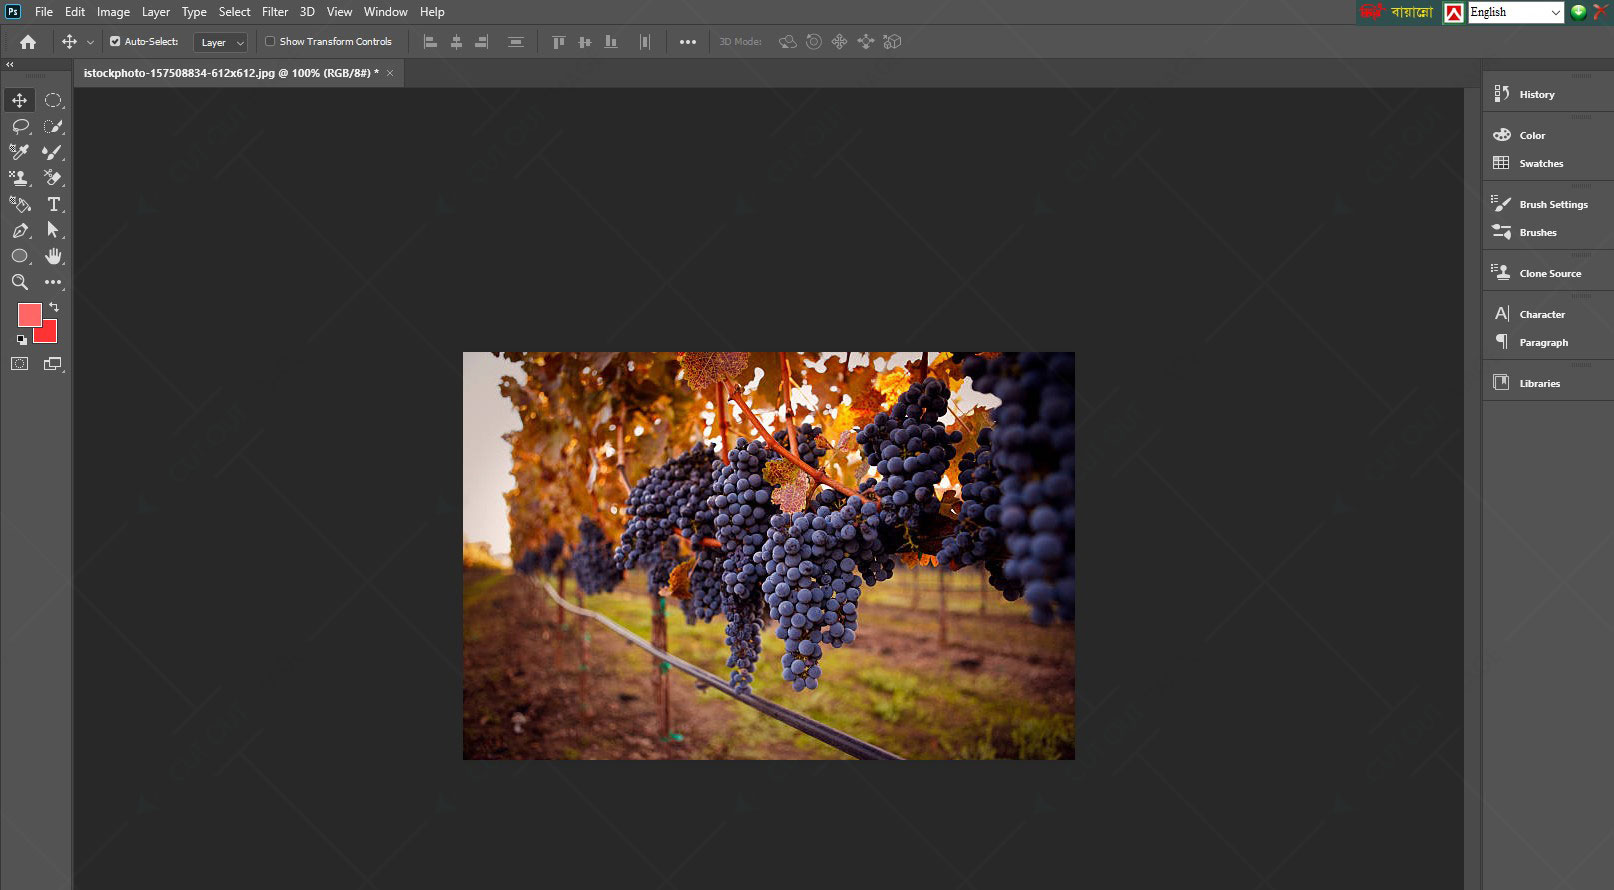 Open Photoshop with a blank canvas